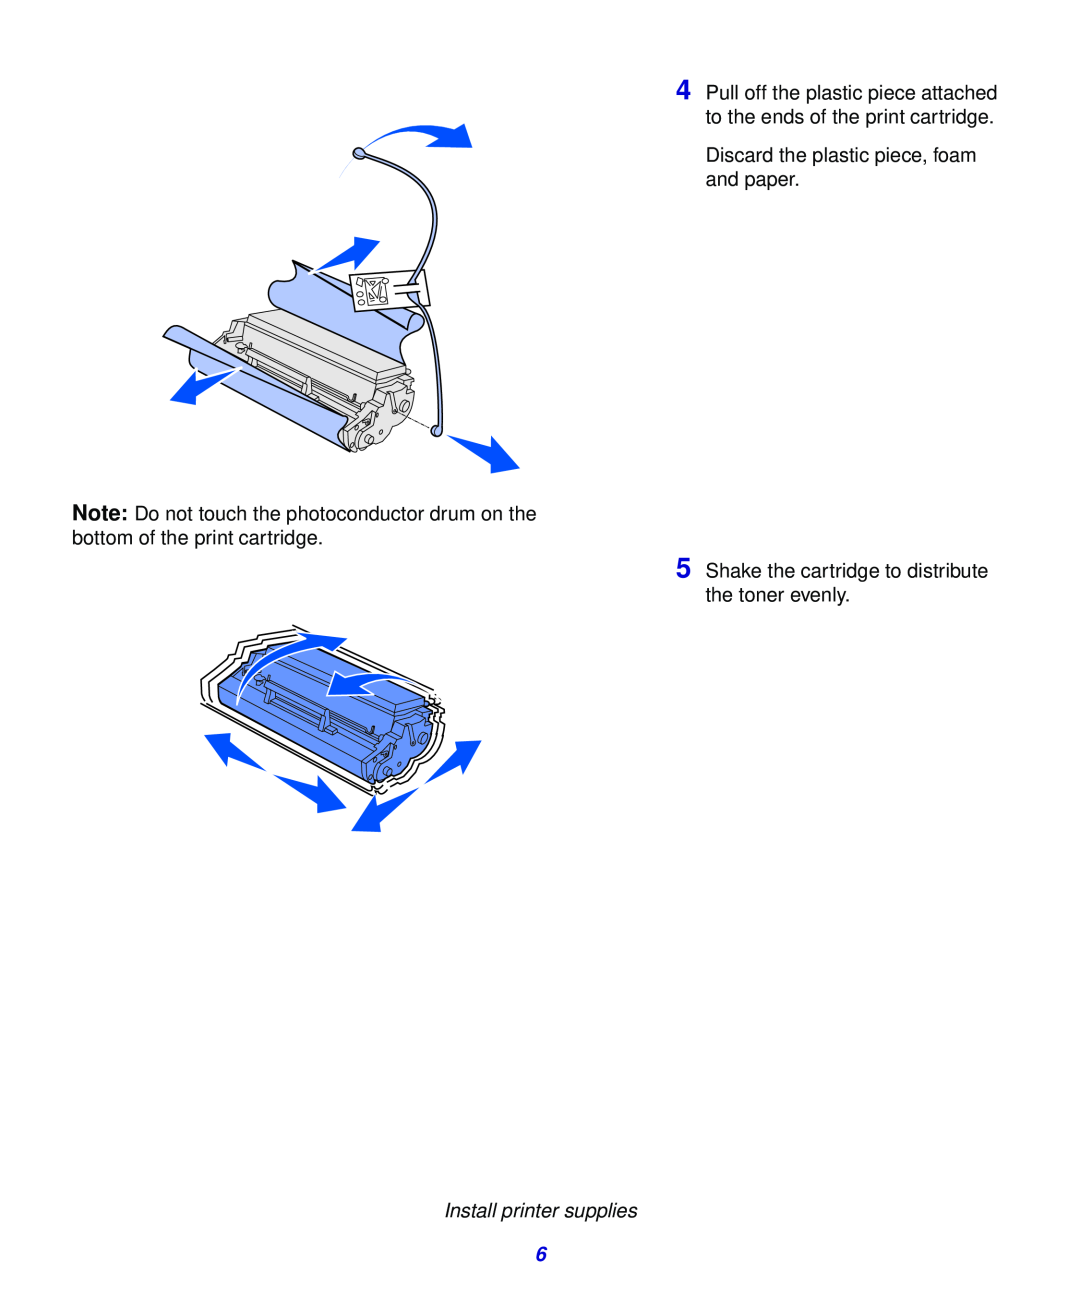 Lexmark 321, 323 setup guide Discard the plastic piece, foam and paper 